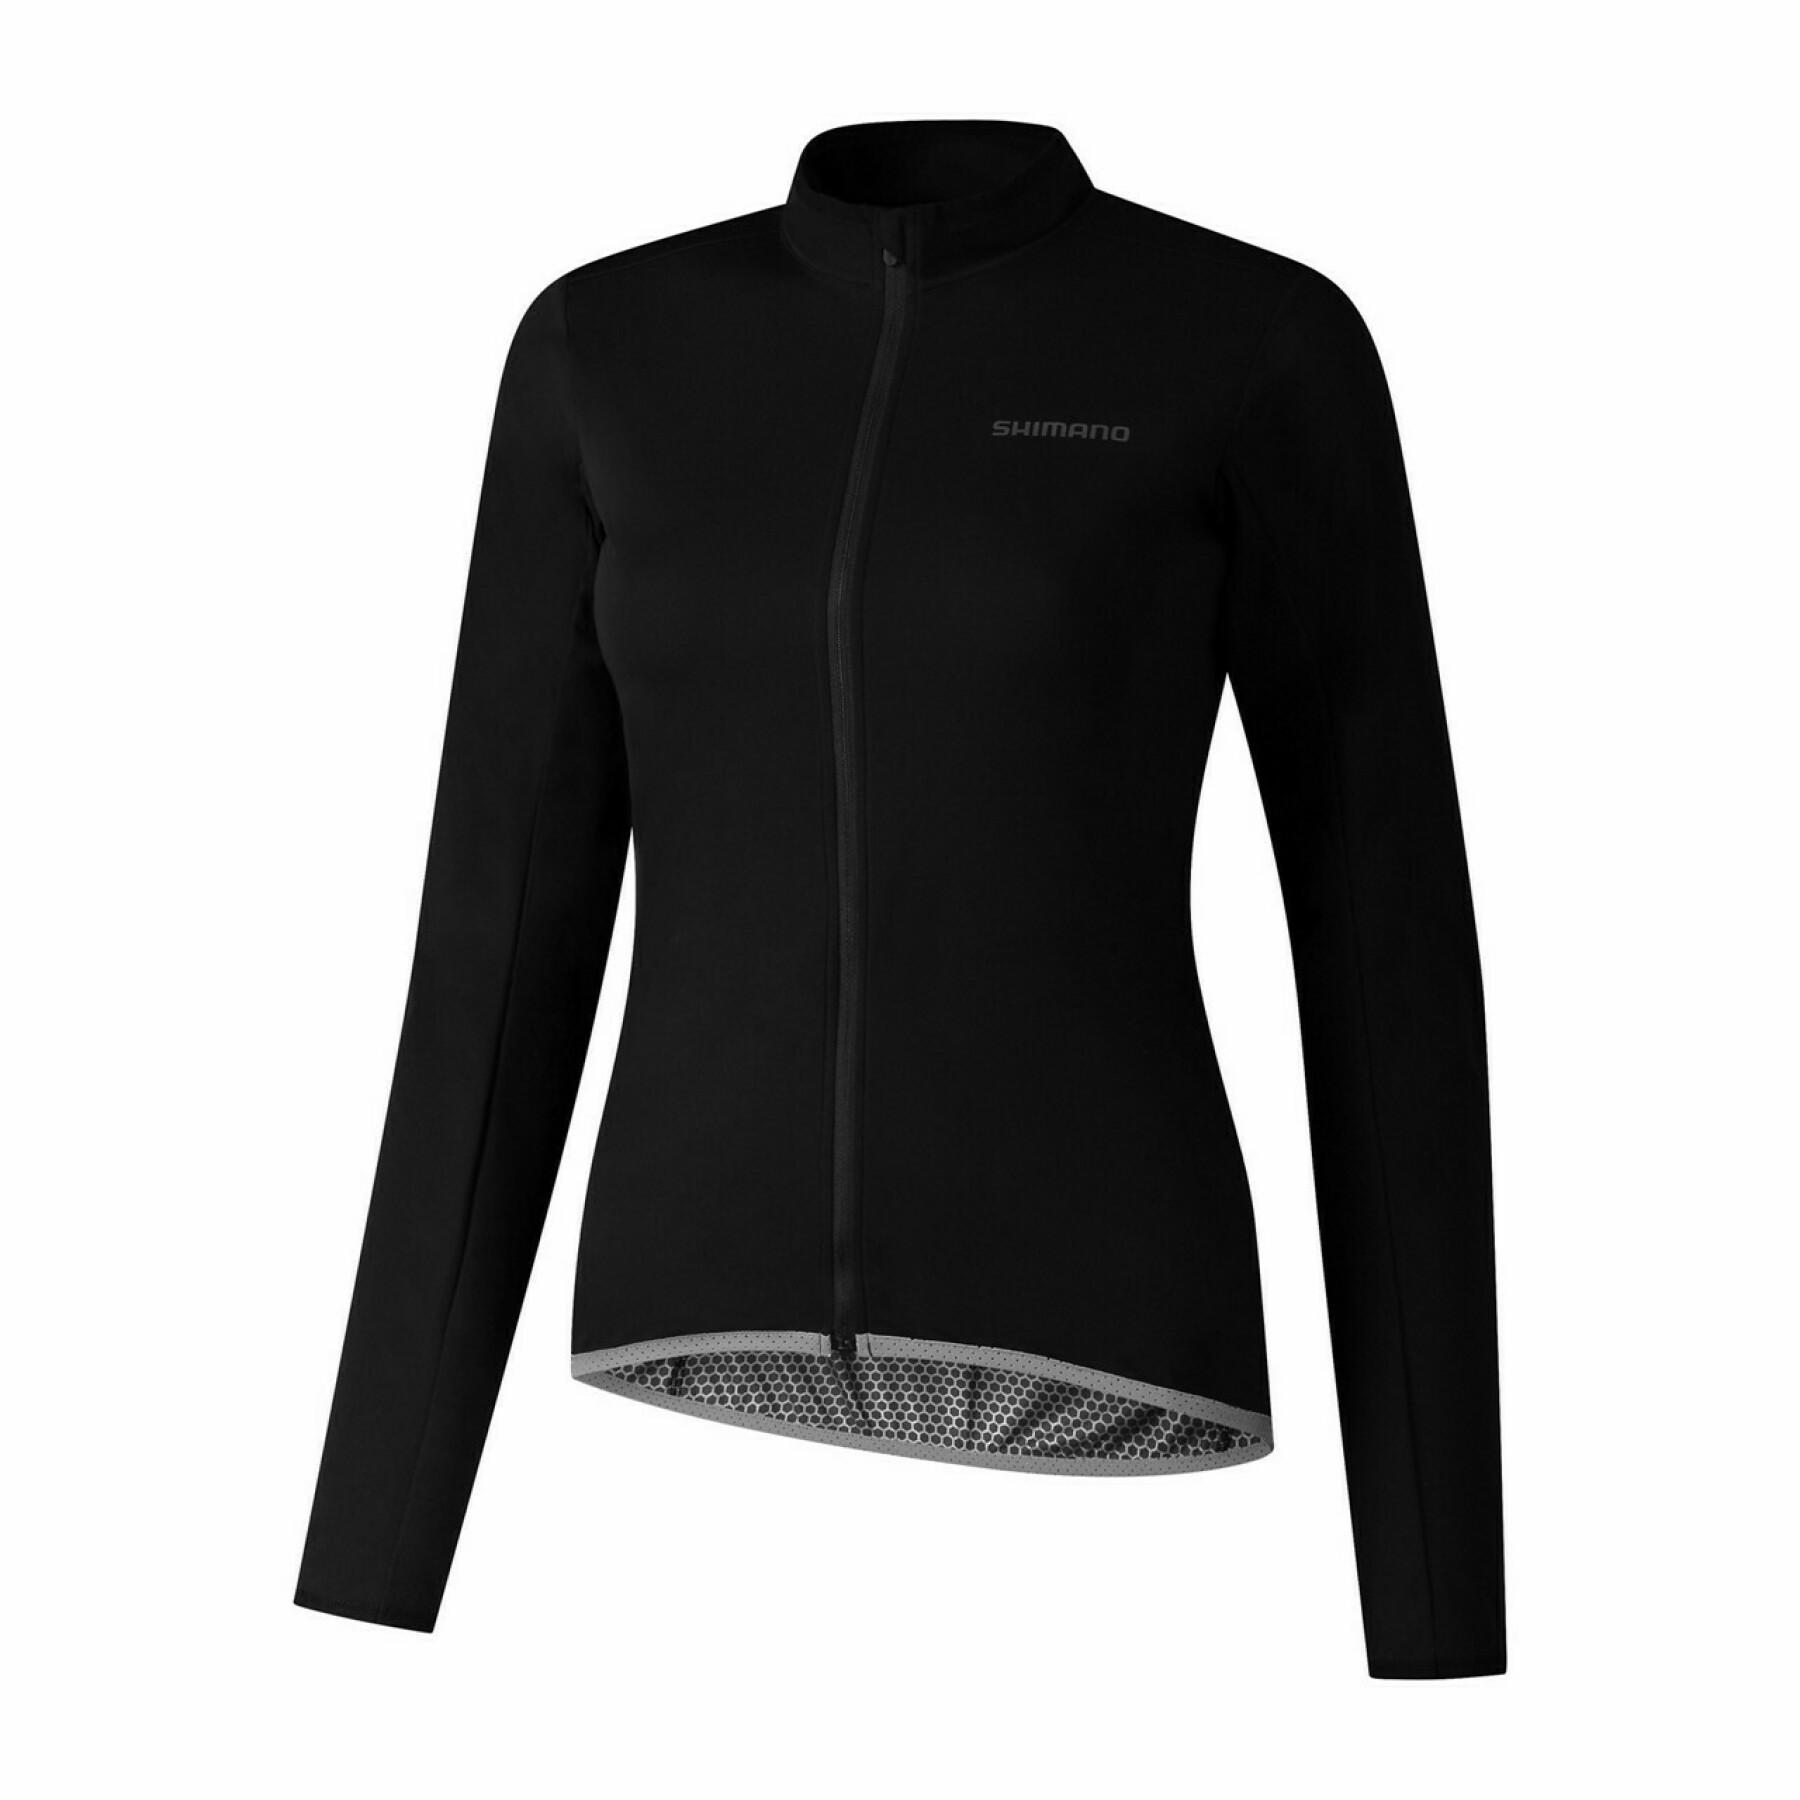 Chaqueta impermeable mujer Shimano Windflex